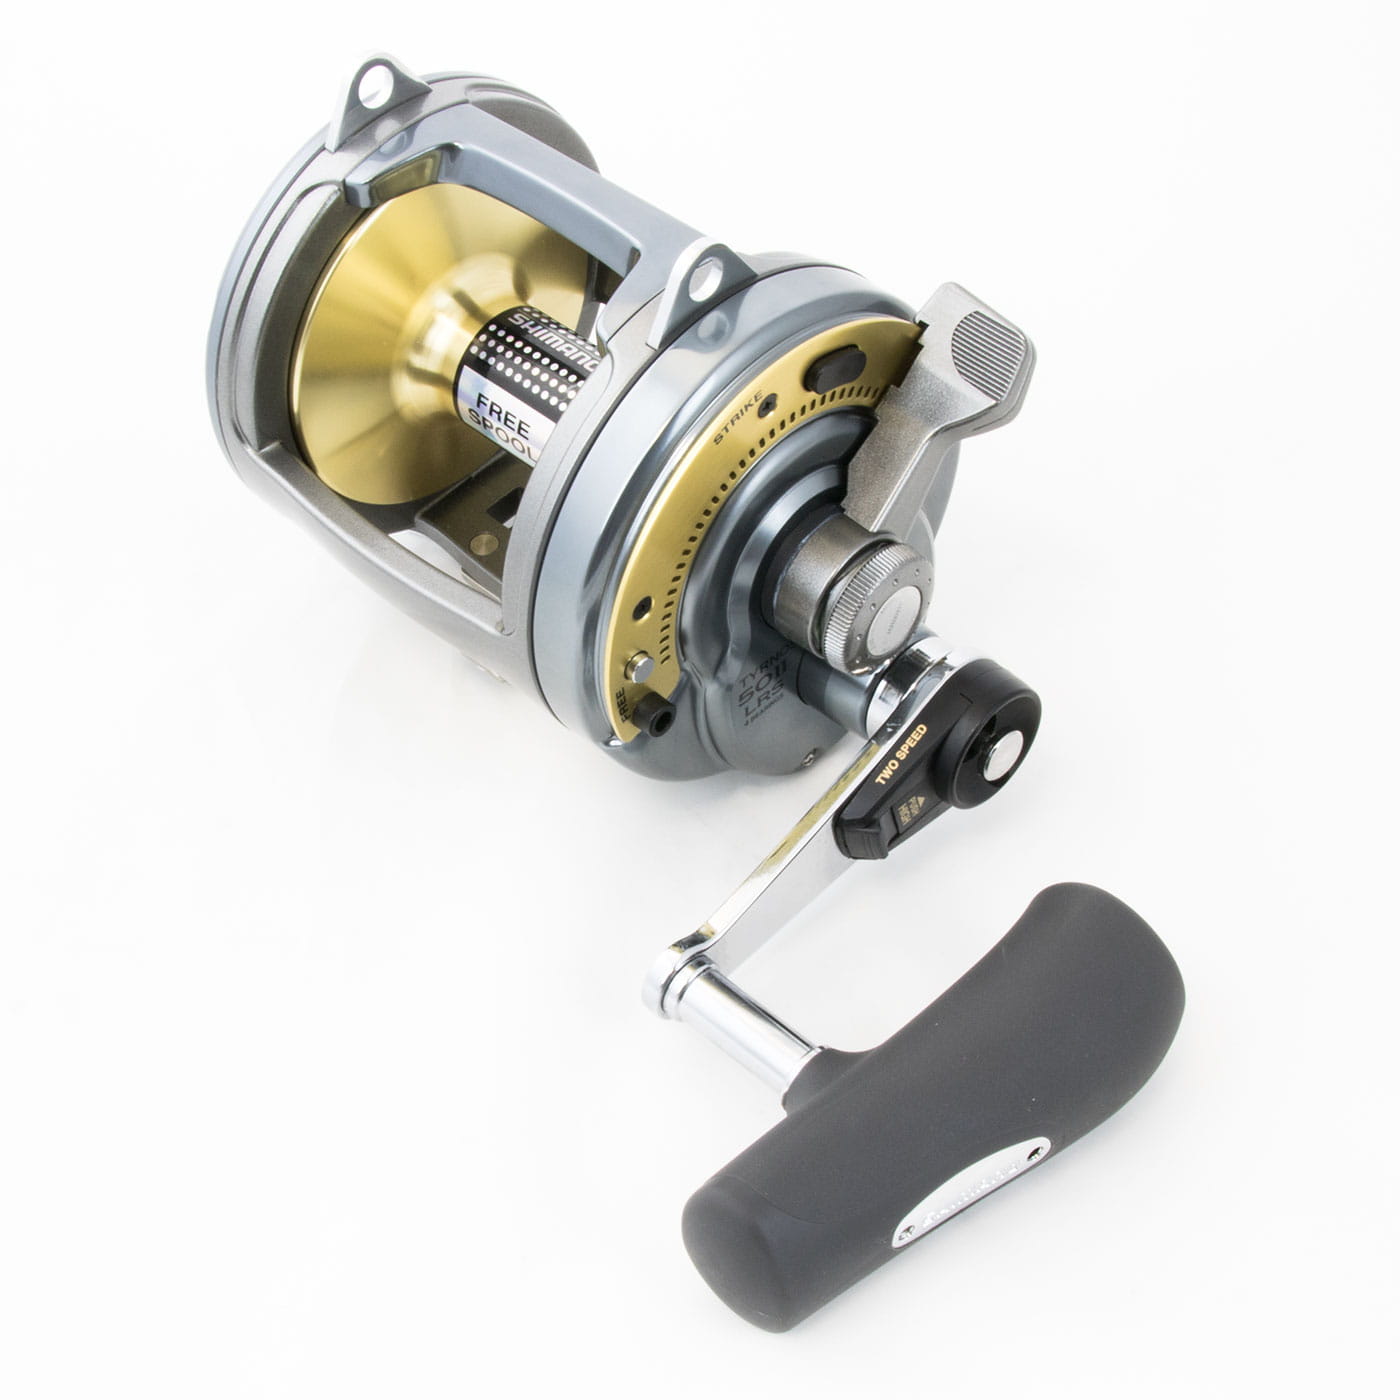 New Boat Jig Trolling Electric Sea Fishing Reel Can Buy 14.8V Battery  Compatible for Shimano and Daiwa Reel Baitcasting Coil